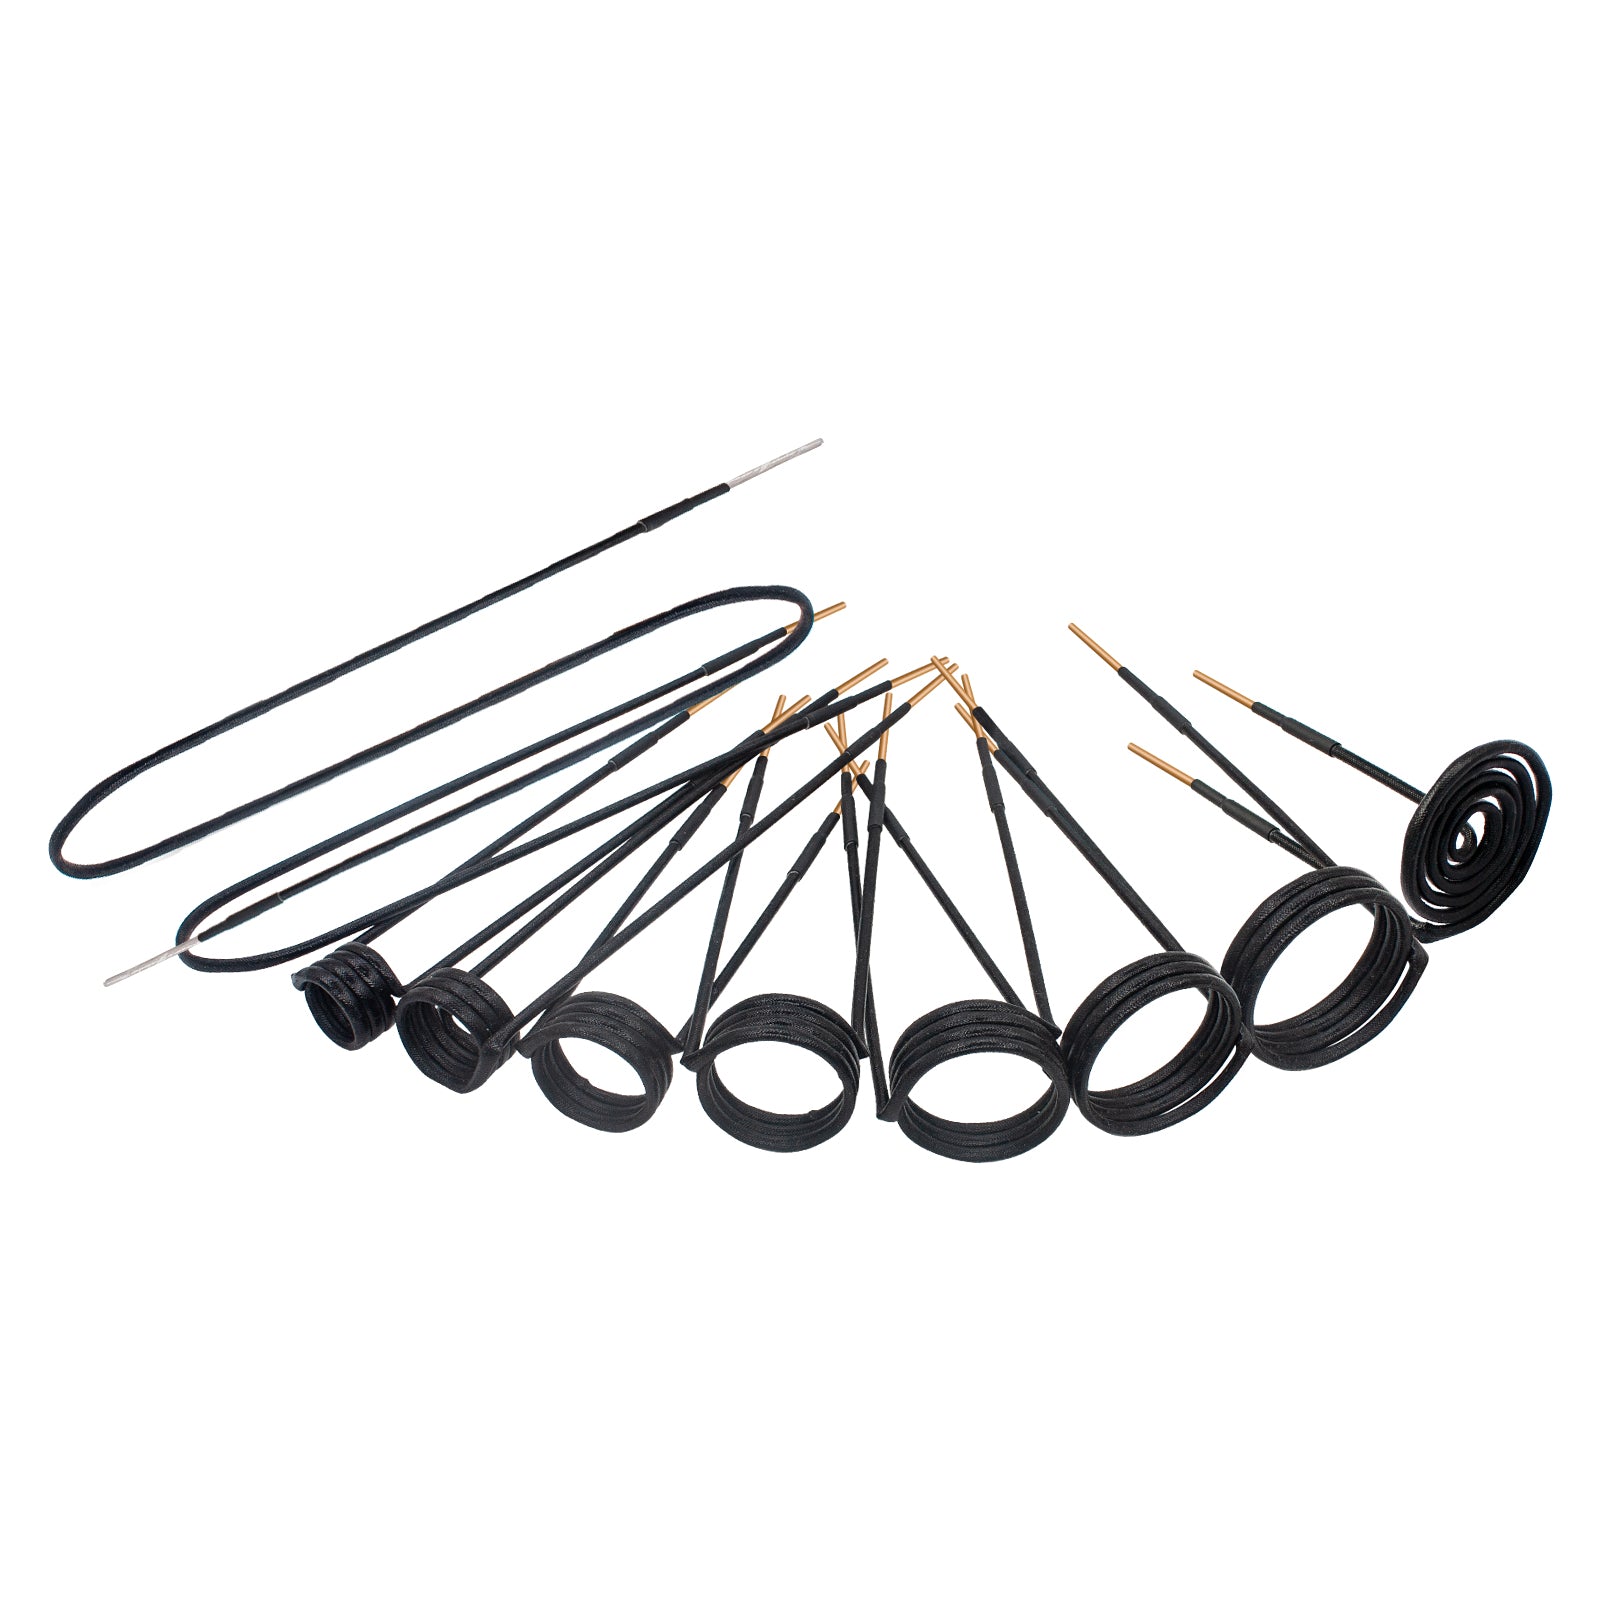 Magnetic Induction Heater Coil Kit - 10PCS Flameless Induction Heat Accessor for Removing Rusty Bolts and Nuts - A - Auto Body Collision Repair Welding Products